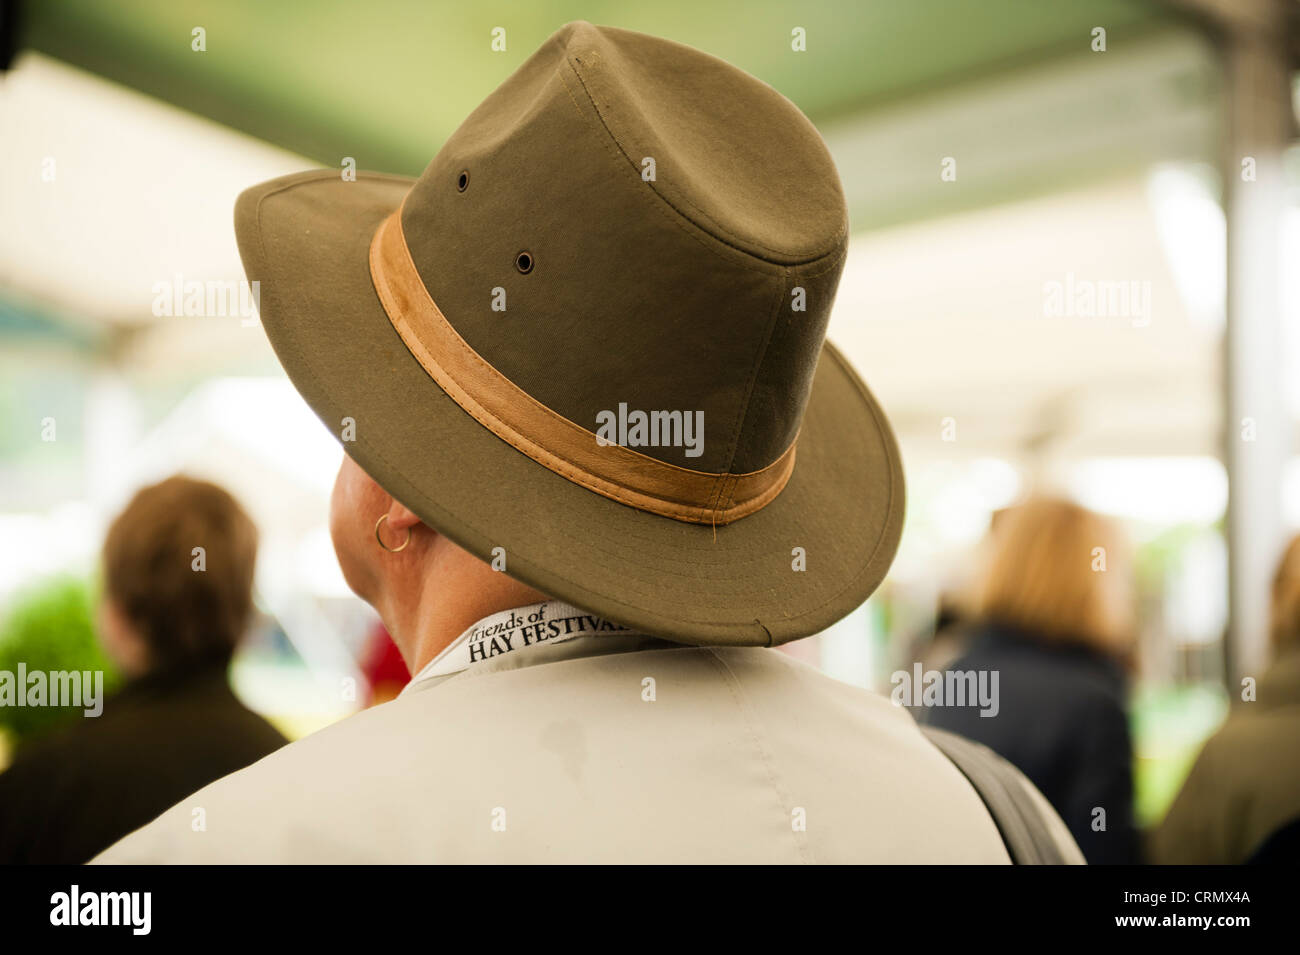 a visitor to the Hay Festival, 2012 Stock Photo